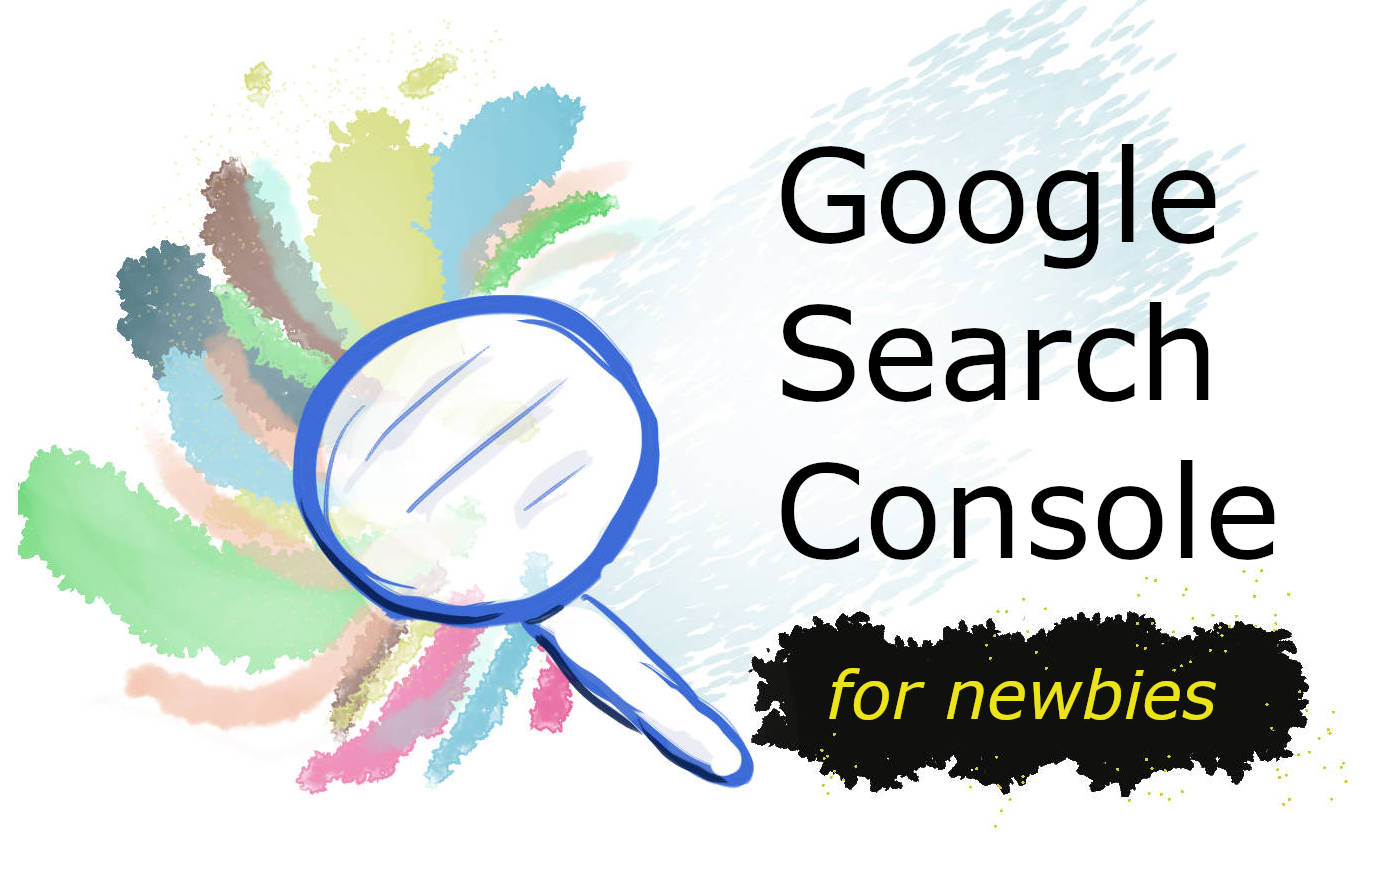 google search console for newbies